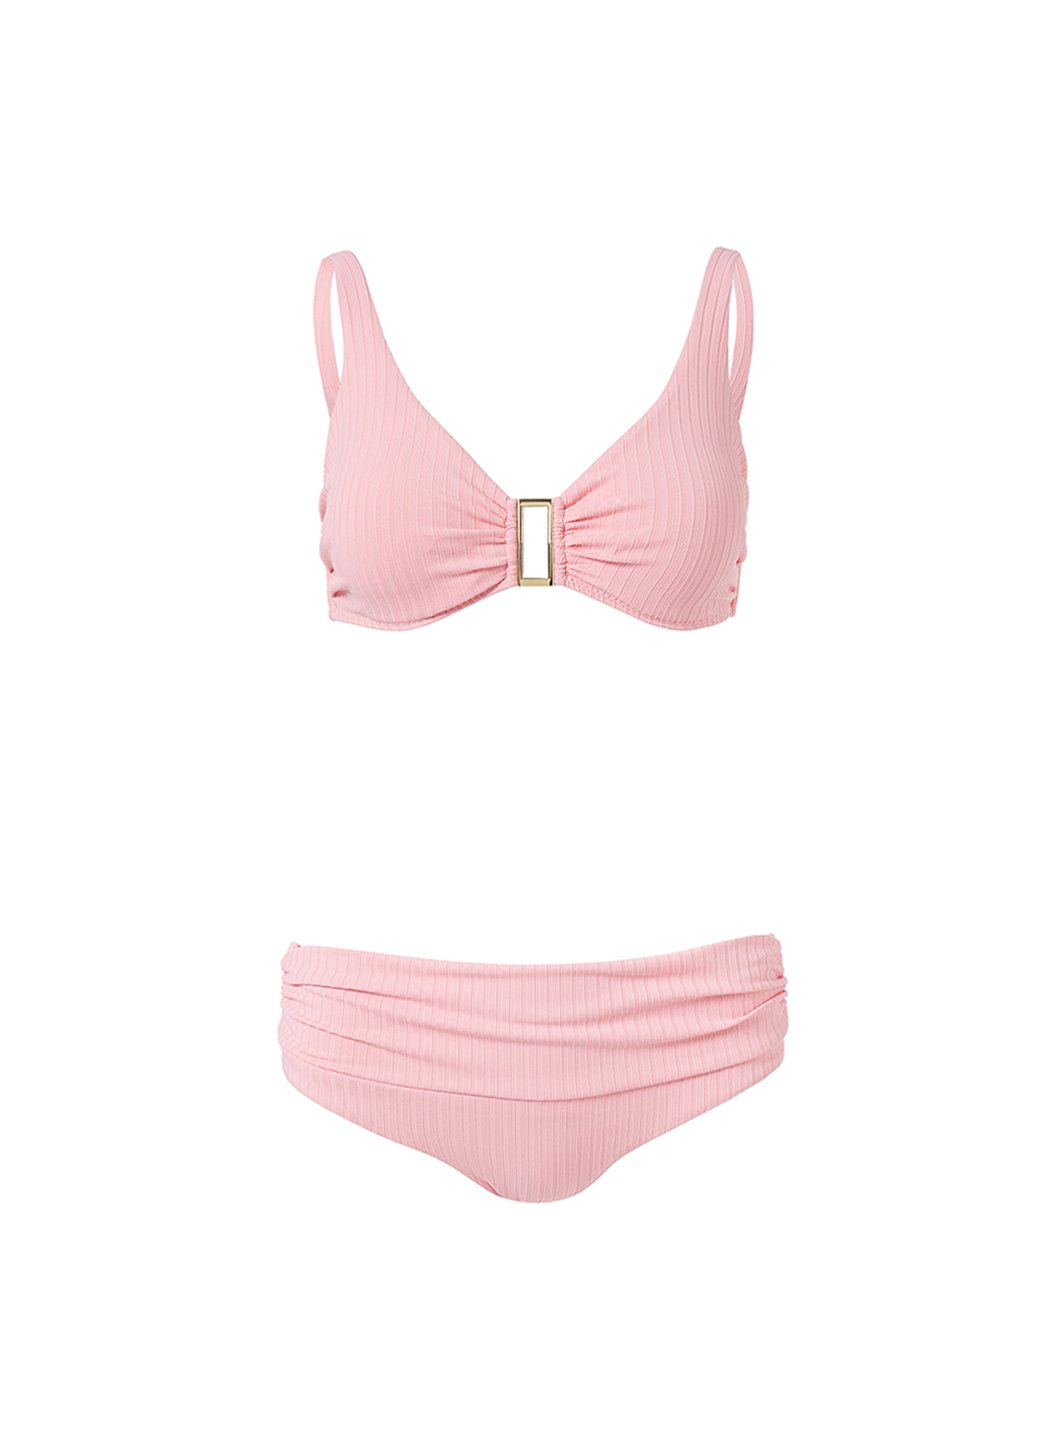 bel air blush ribbed supportive over the shoulder bikini Cutout